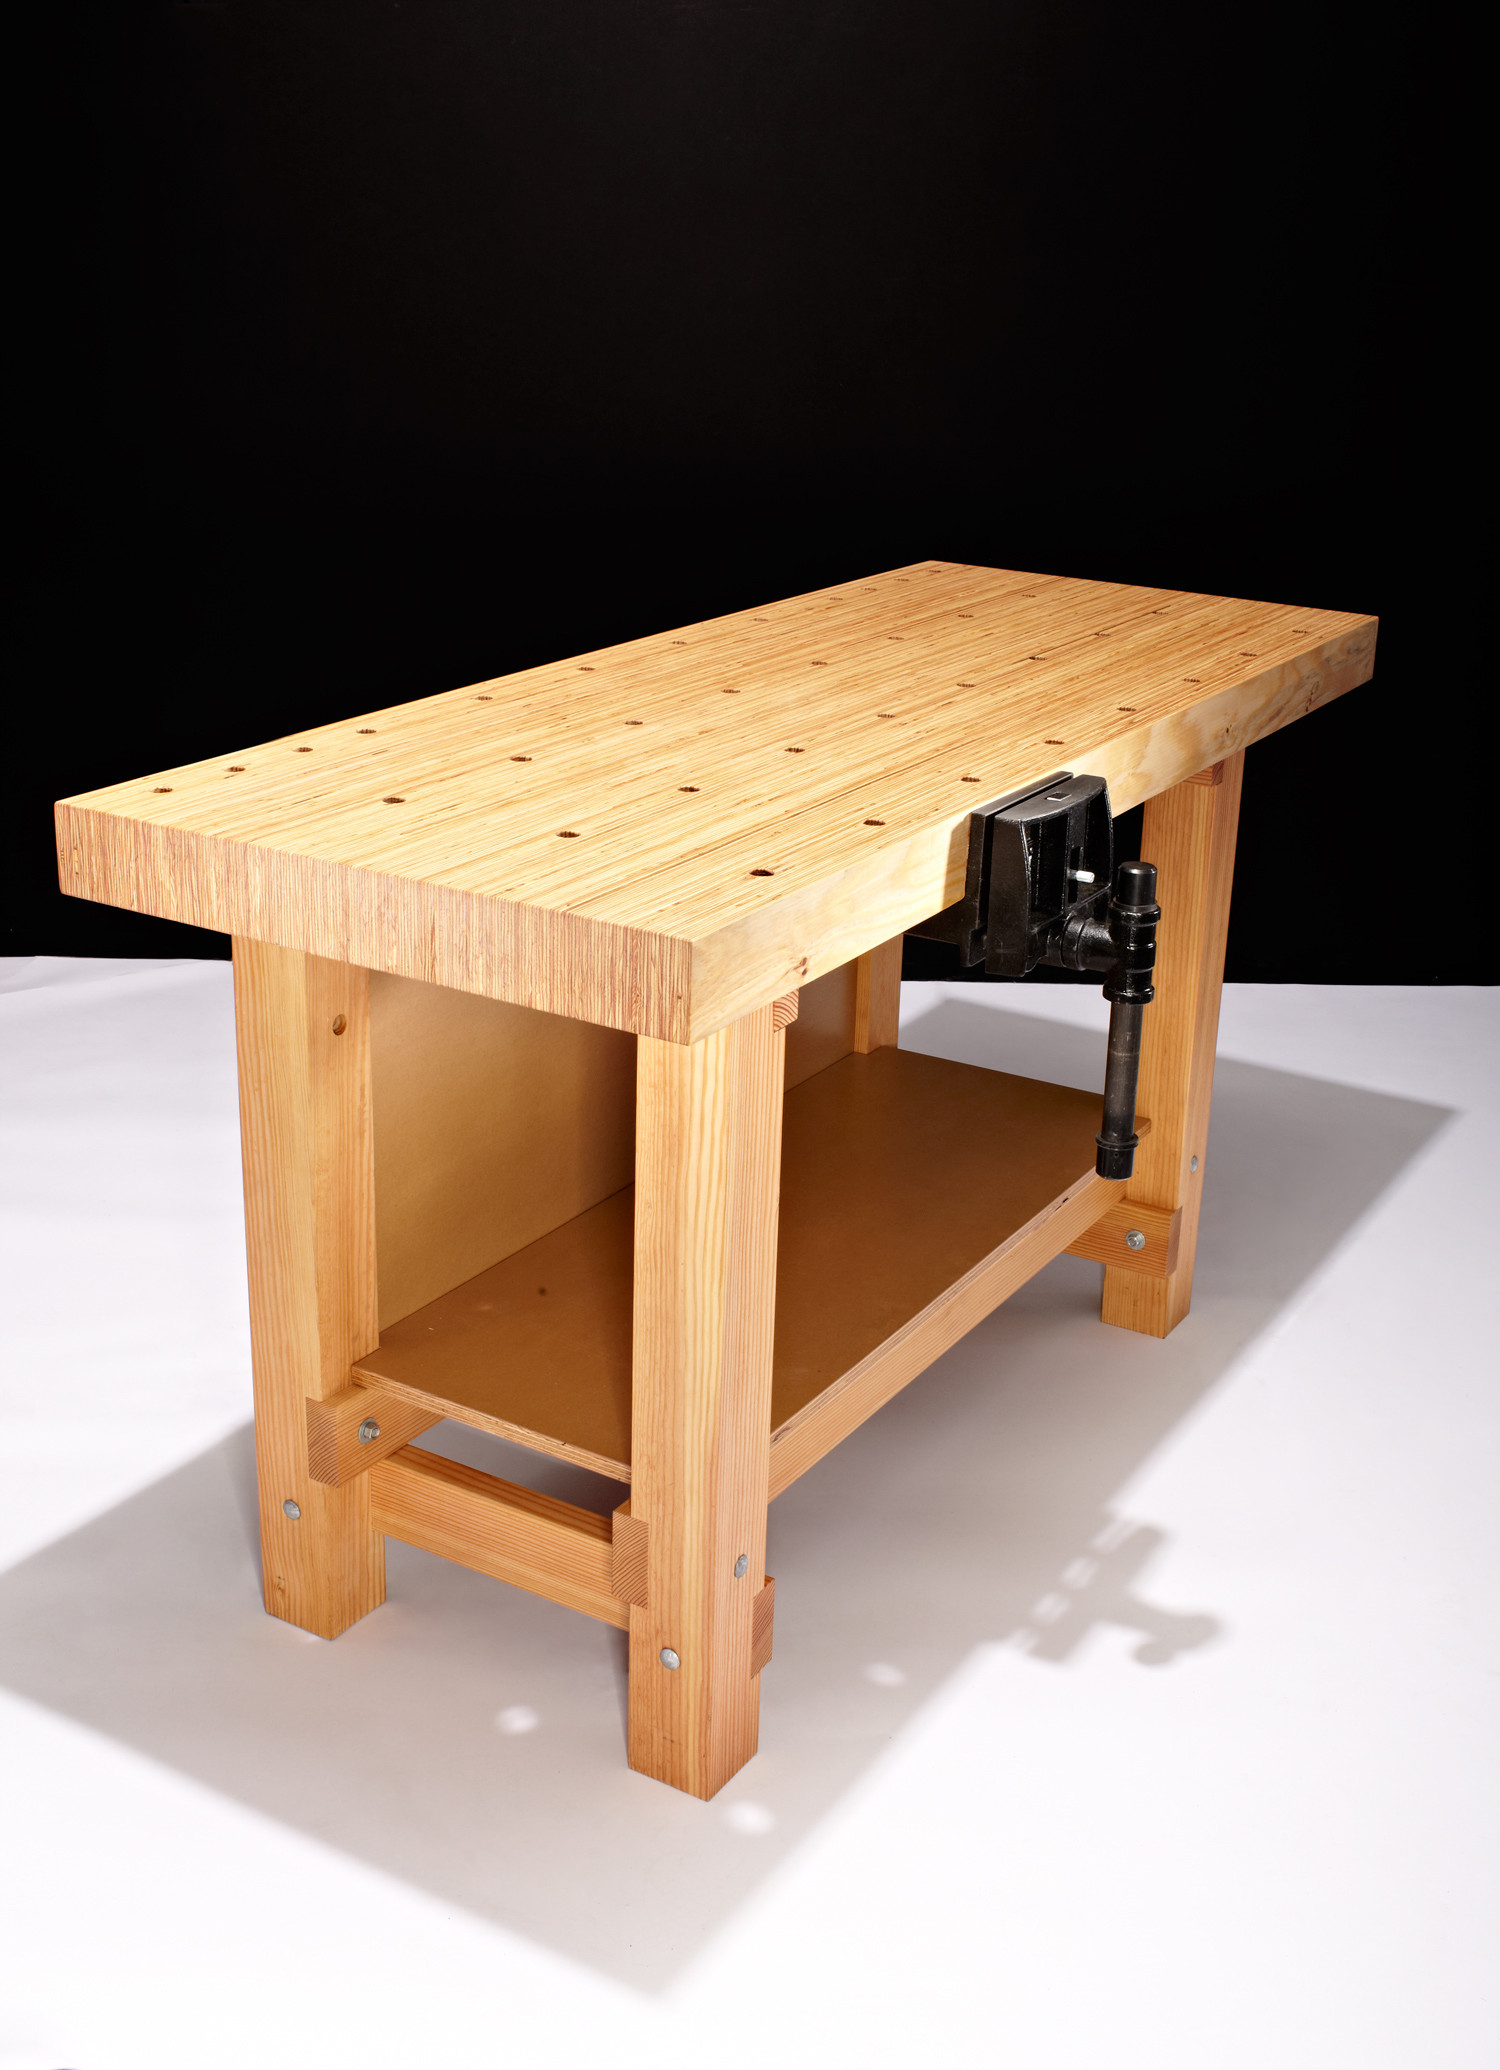 DIY Wood Workbench
 How to build a workbench